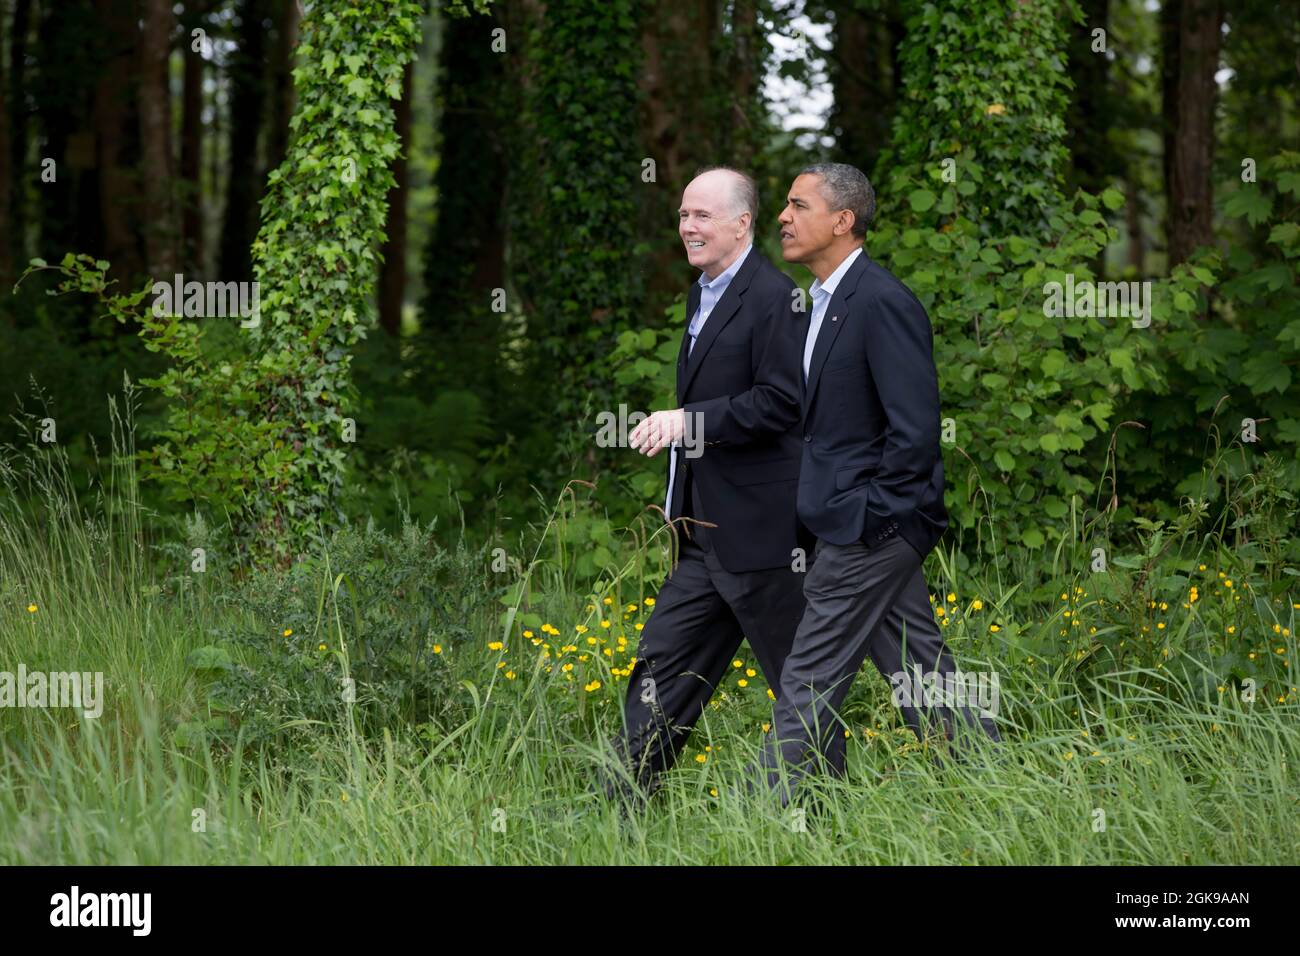 President Barack Obama walks with National Security Advisor Tom Donilon on the grounds of Lough Erne Resort at the conclusion of the G8 Summit in Enniskillen, Northern Ireland, June 18, 2013. (Official White House Photo by Pete Souza)  This official White House photograph is being made available only for publication by news organizations and/or for personal use printing by the subject(s) of the photograph. The photograph may not be manipulated in any way and may not be used in commercial or political materials, advertisements, emails, products, promotions that in any way suggests approval or e Stock Photo